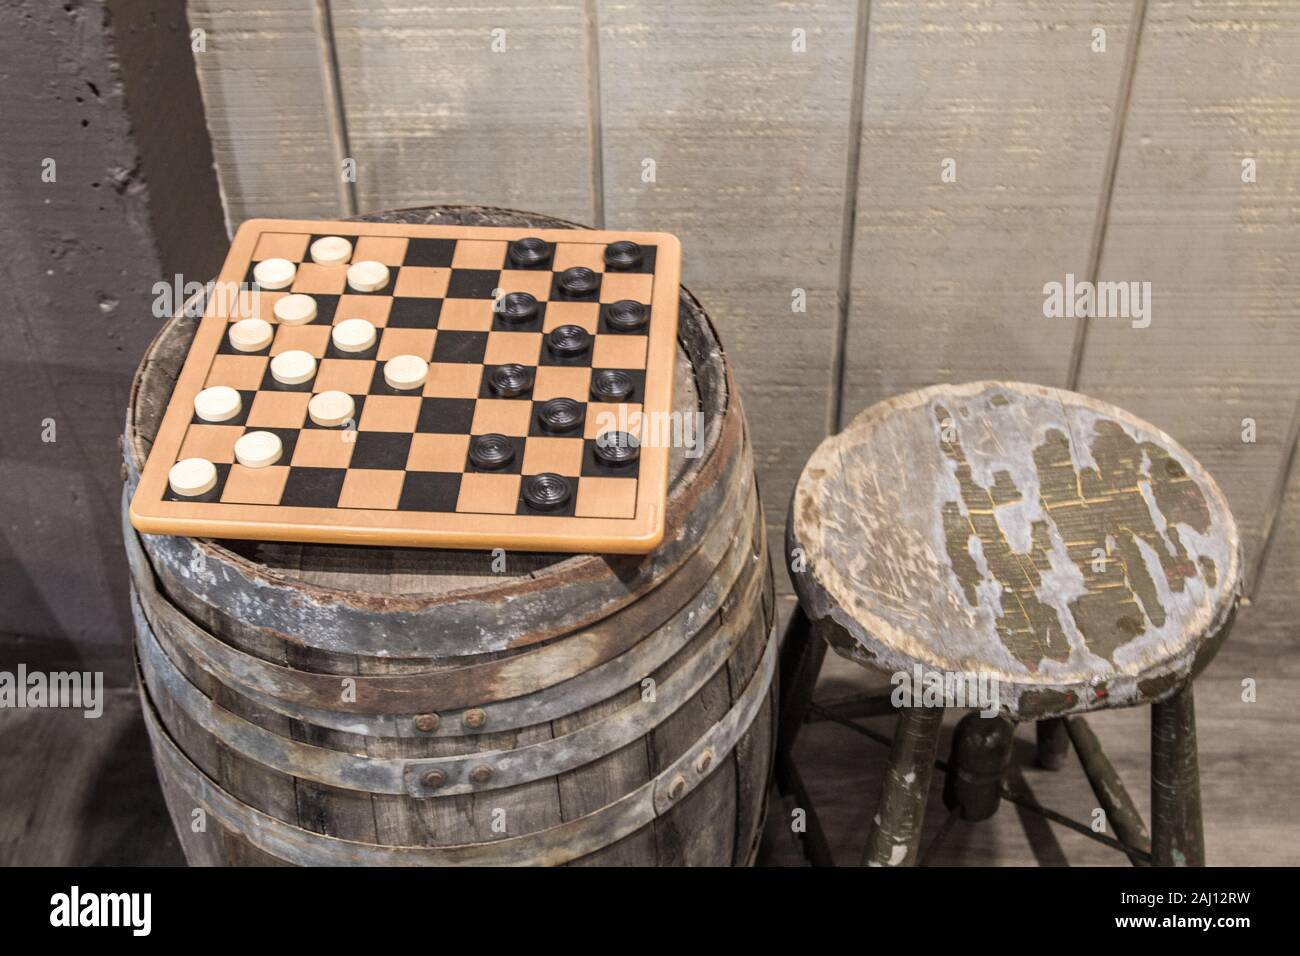 Old Fashioned Game Of Checkers. Checkerboard game with checkers on an old wooden keg barrel with old wood stool. Stock Photo